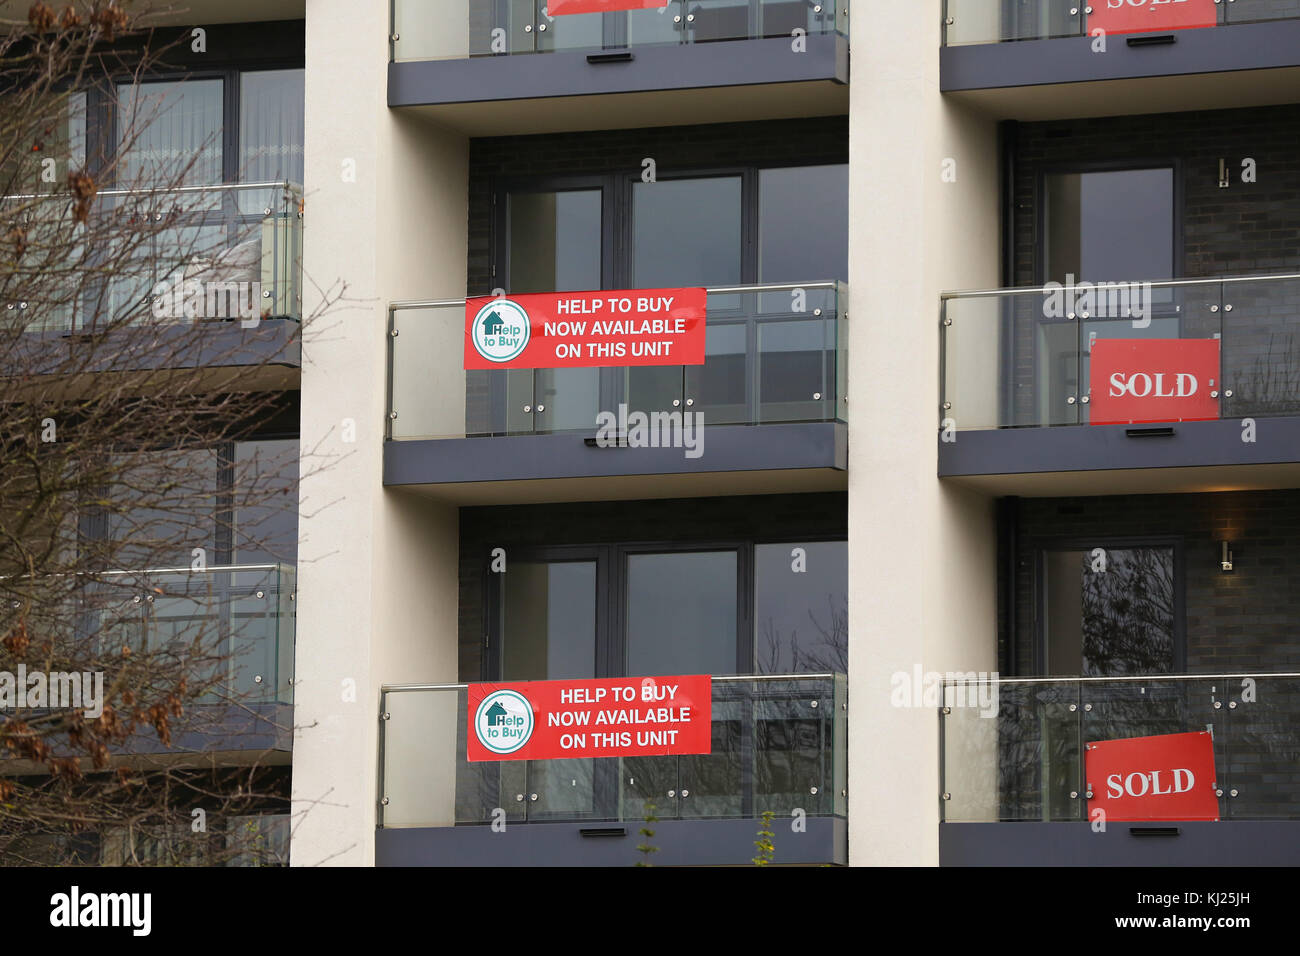 North London. UK 21 Nov 2017 - 'Sold' signs on a new housing estate in North London properties as Britain's Chancellor of the Exchequer Philip Hammond is expected to announce plans to build 300,000 homes every year, in his autumn budget on Wednesday, 22 November 2017. It has been reported in the Sunday Times newspaper that Philip Hammond will do 'whatever it takes' to meet this target. Stock Photo